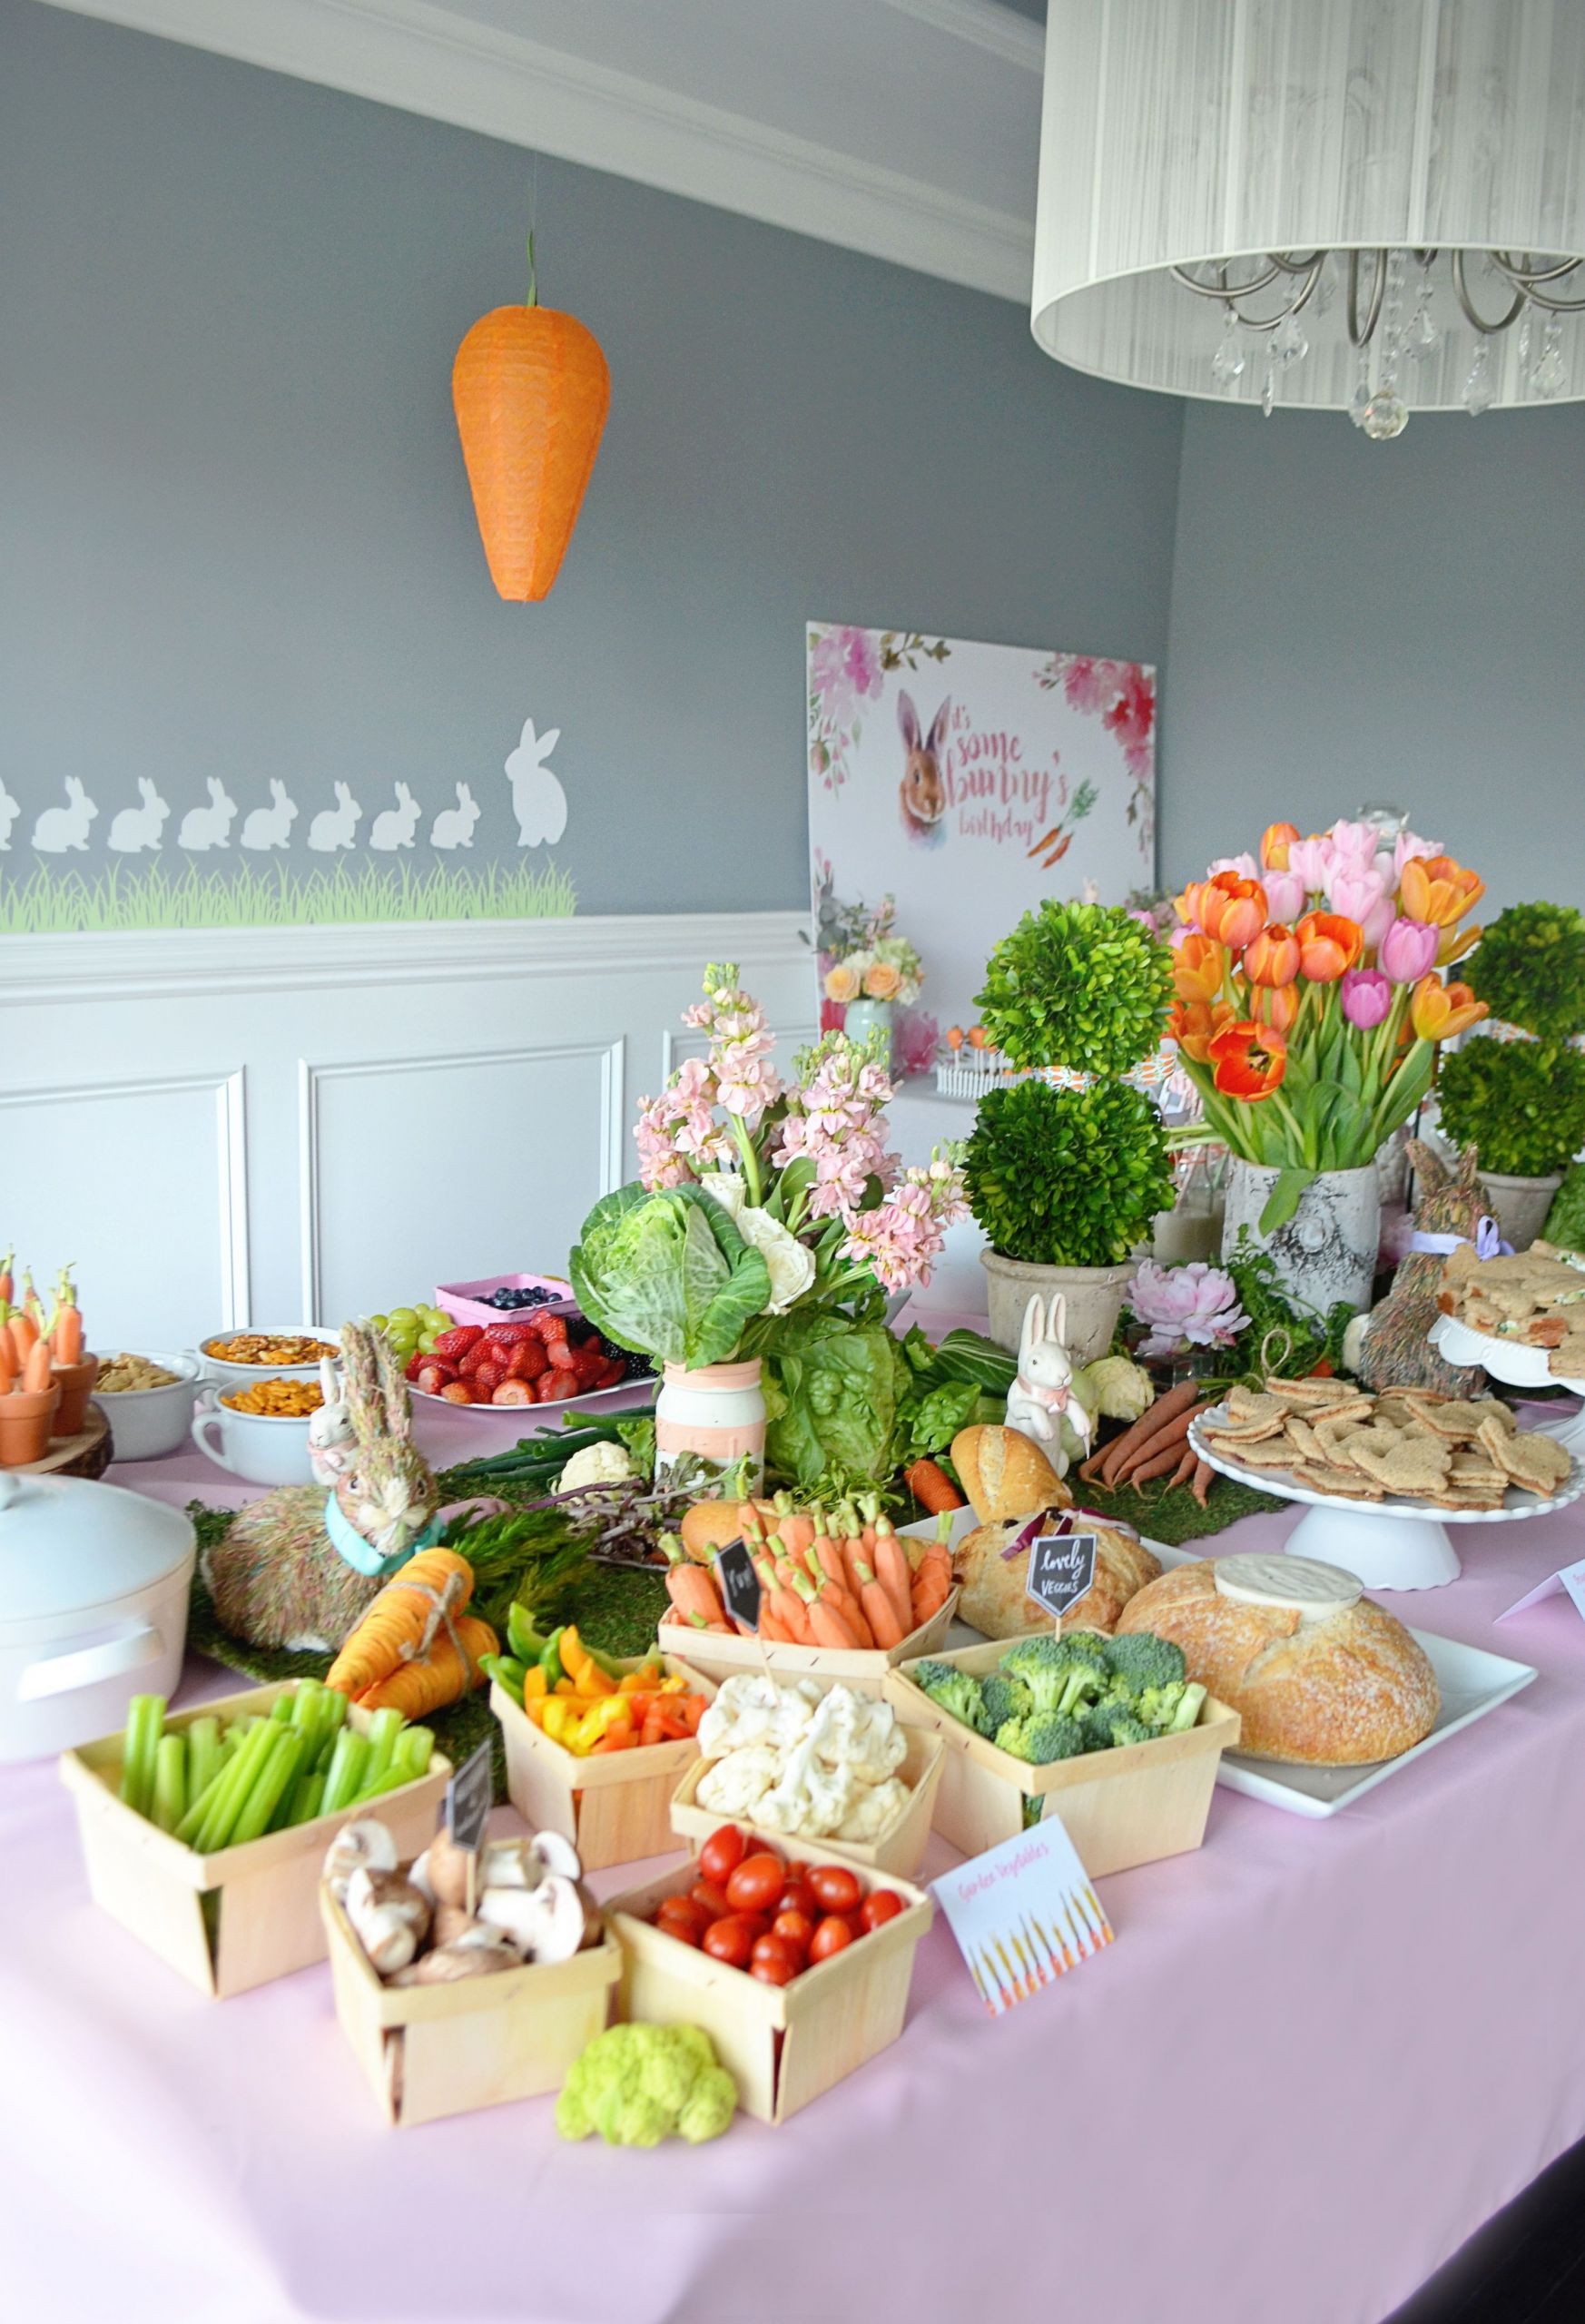 Snack Ideas For Easter Party
 Shop the Party Bunny Themed Party